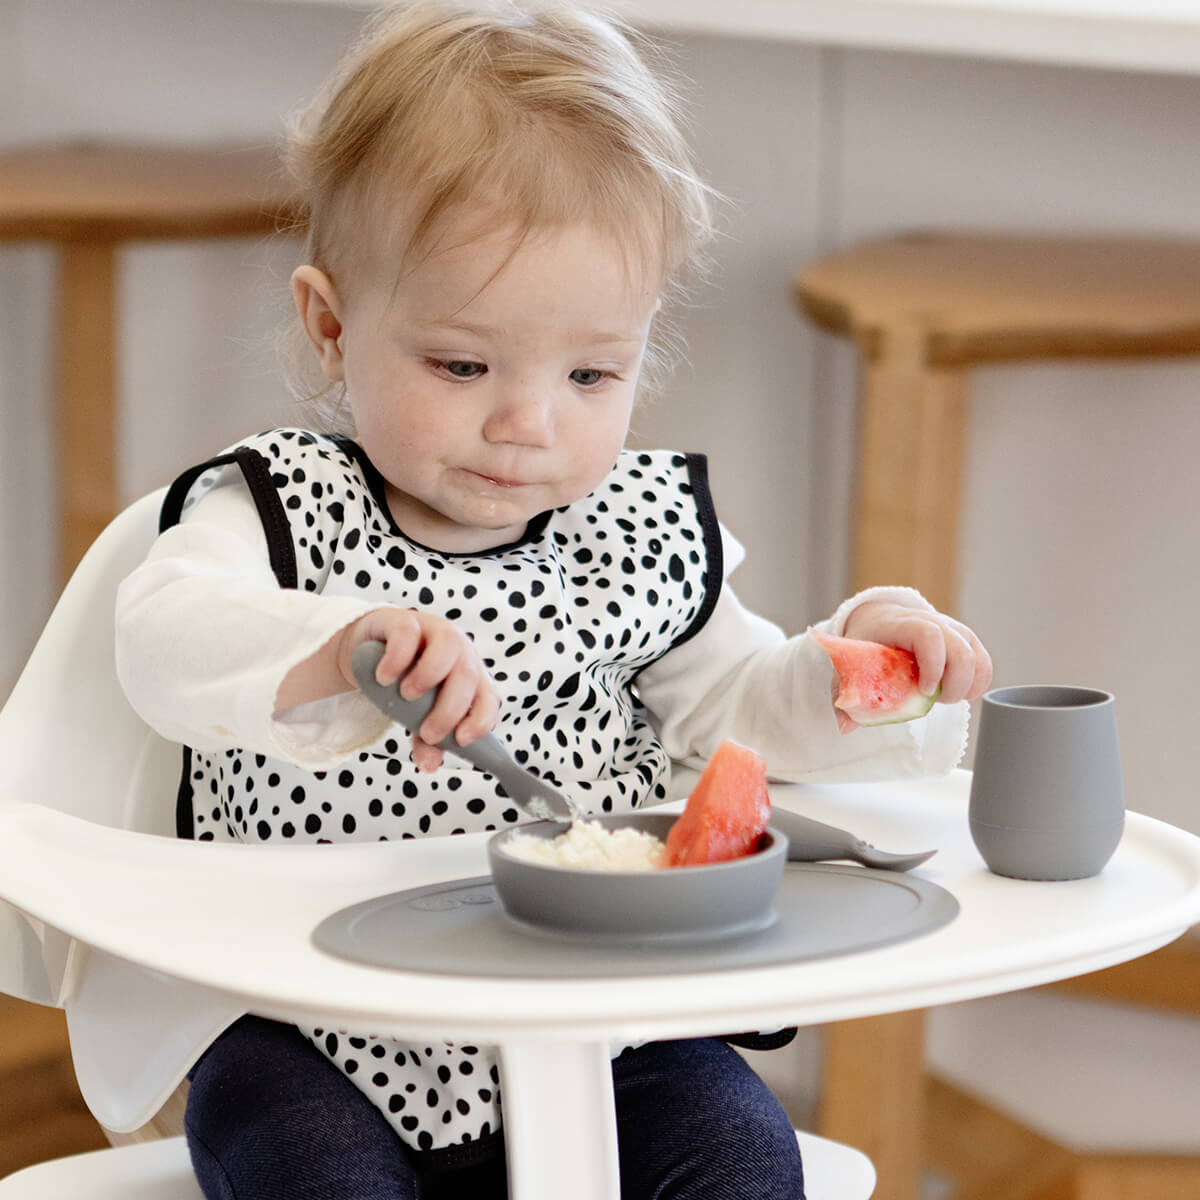 EZPZ First Foods Set, Best-Selling Baby Gift